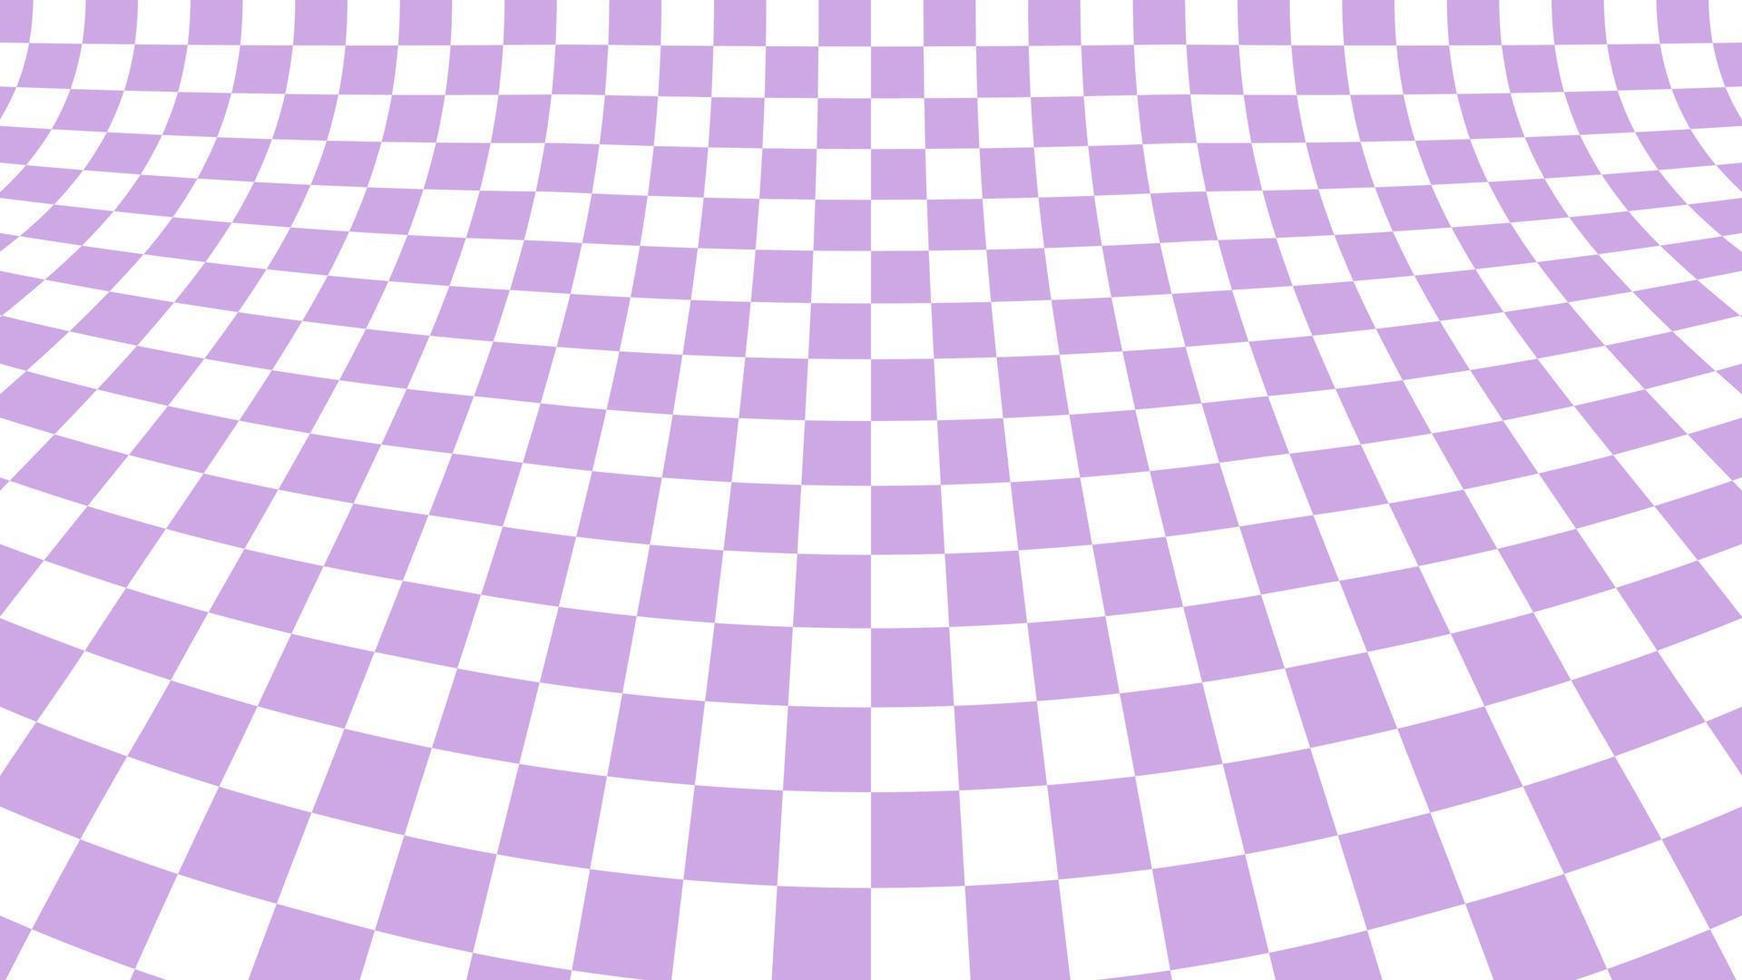 aesthetic cute abstract purple and white distorted checkers, checkerboard wallpaper illustration, perfect for backdrop, wallpaper, background, banner, cover